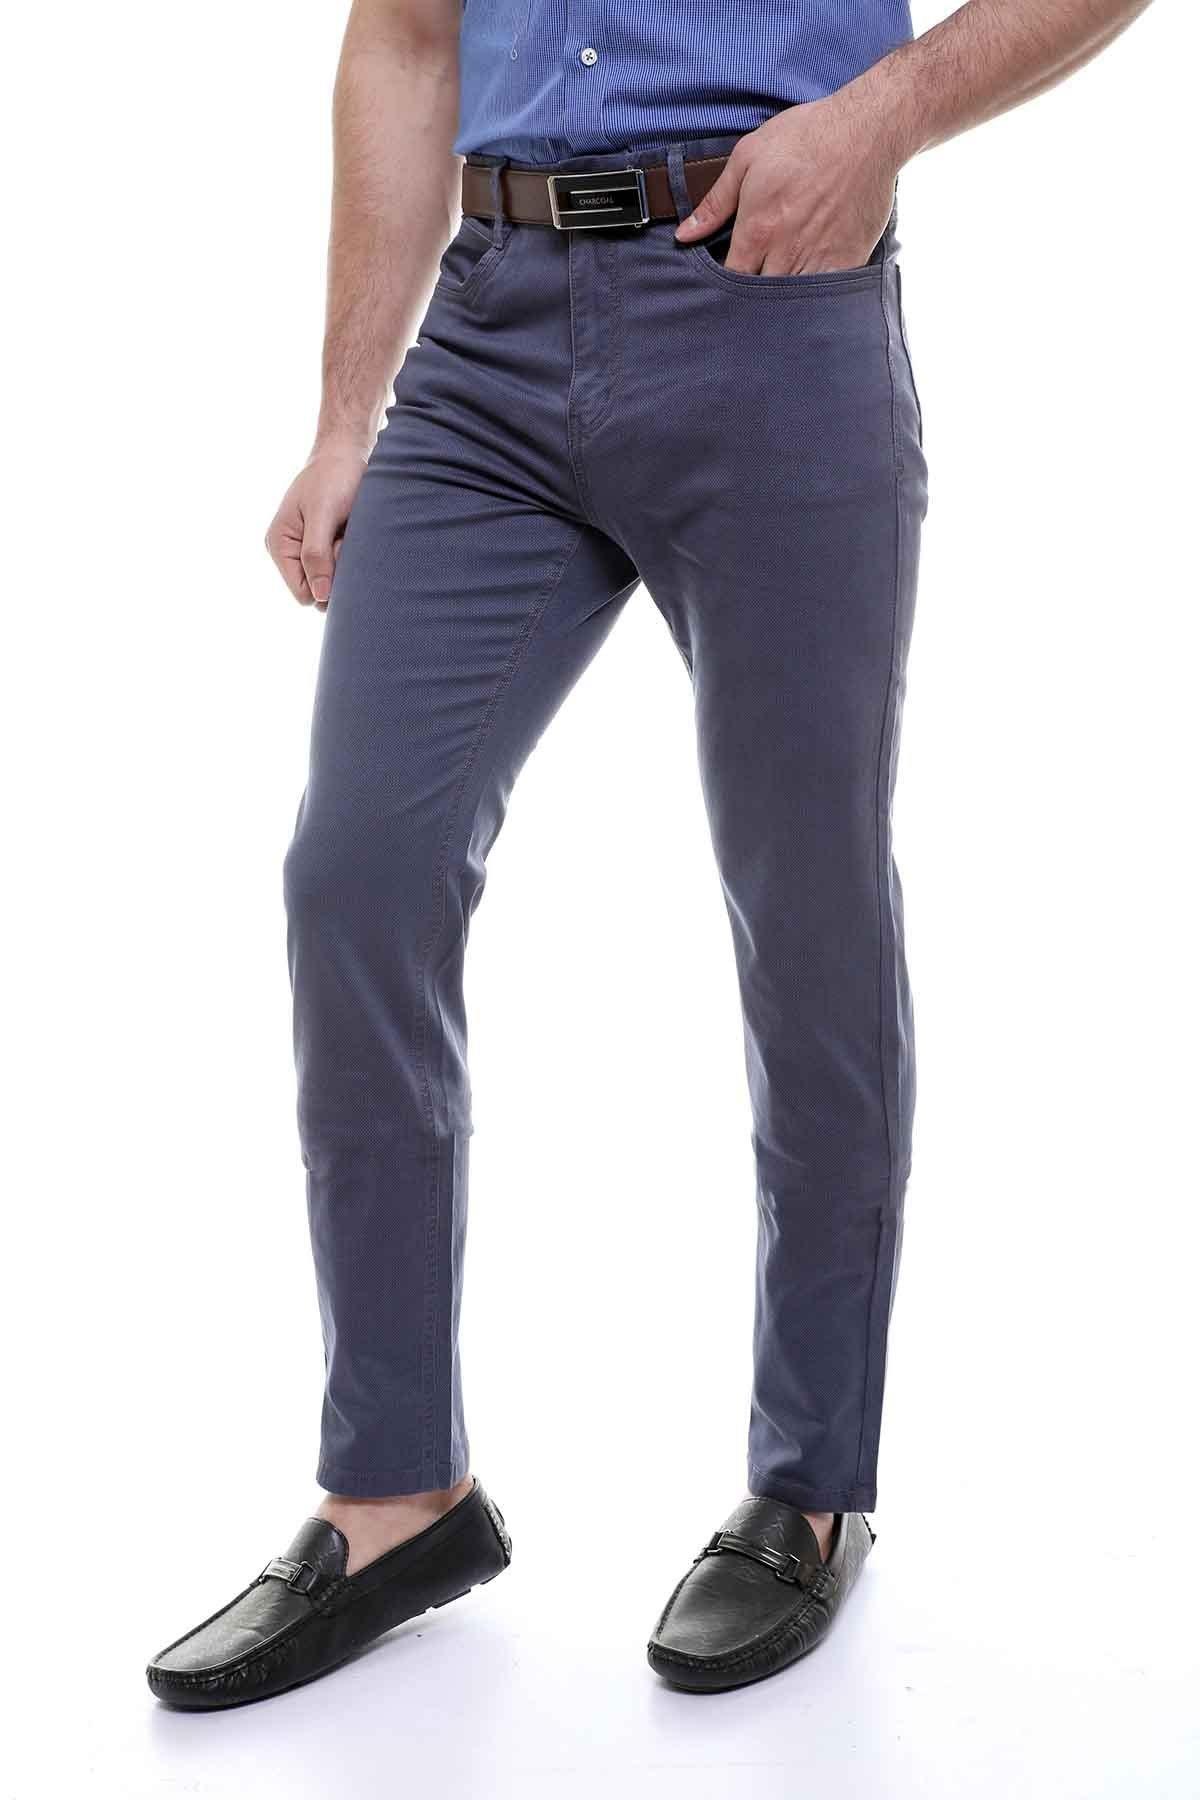 CASUAL PANT 5 POCKET SLIM FIT LIGHT BLUE at Charcoal Clothing